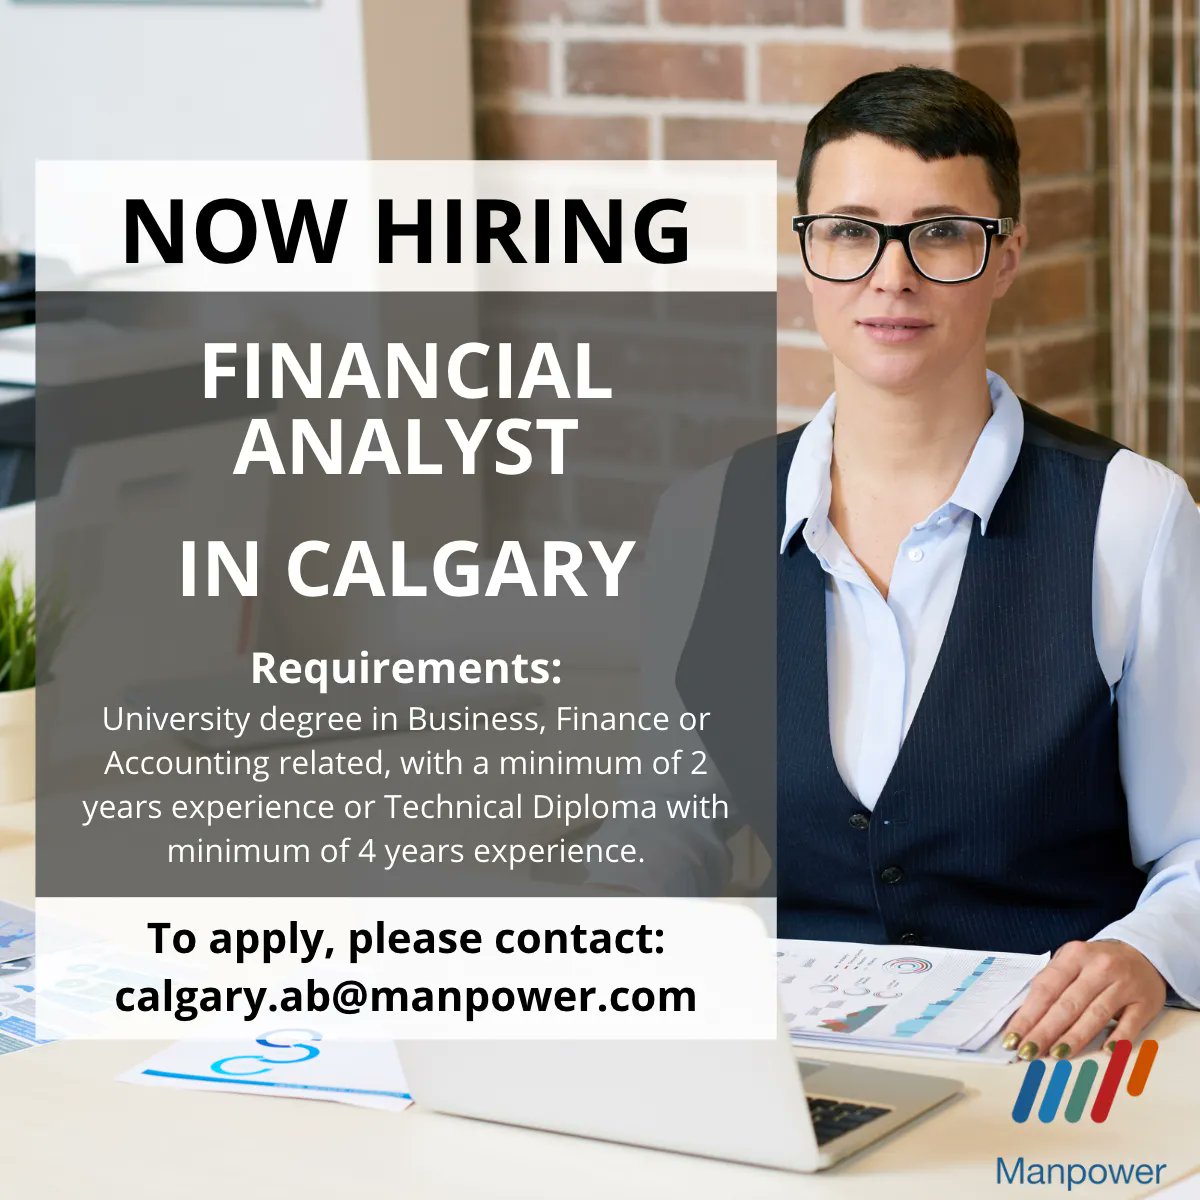 #NOWHIRING: #FinancialAnalyst in #Calgary, #Alberta

To apply, please forward your resume to calgary.ab@manpower.com or apply directly at buff.ly/3N3OwKL 

#manpowerab #albertajobs #canadajobs #canadajobsearch #canada #yycjobs #calgaryjobs #manpowerjobs #yyc